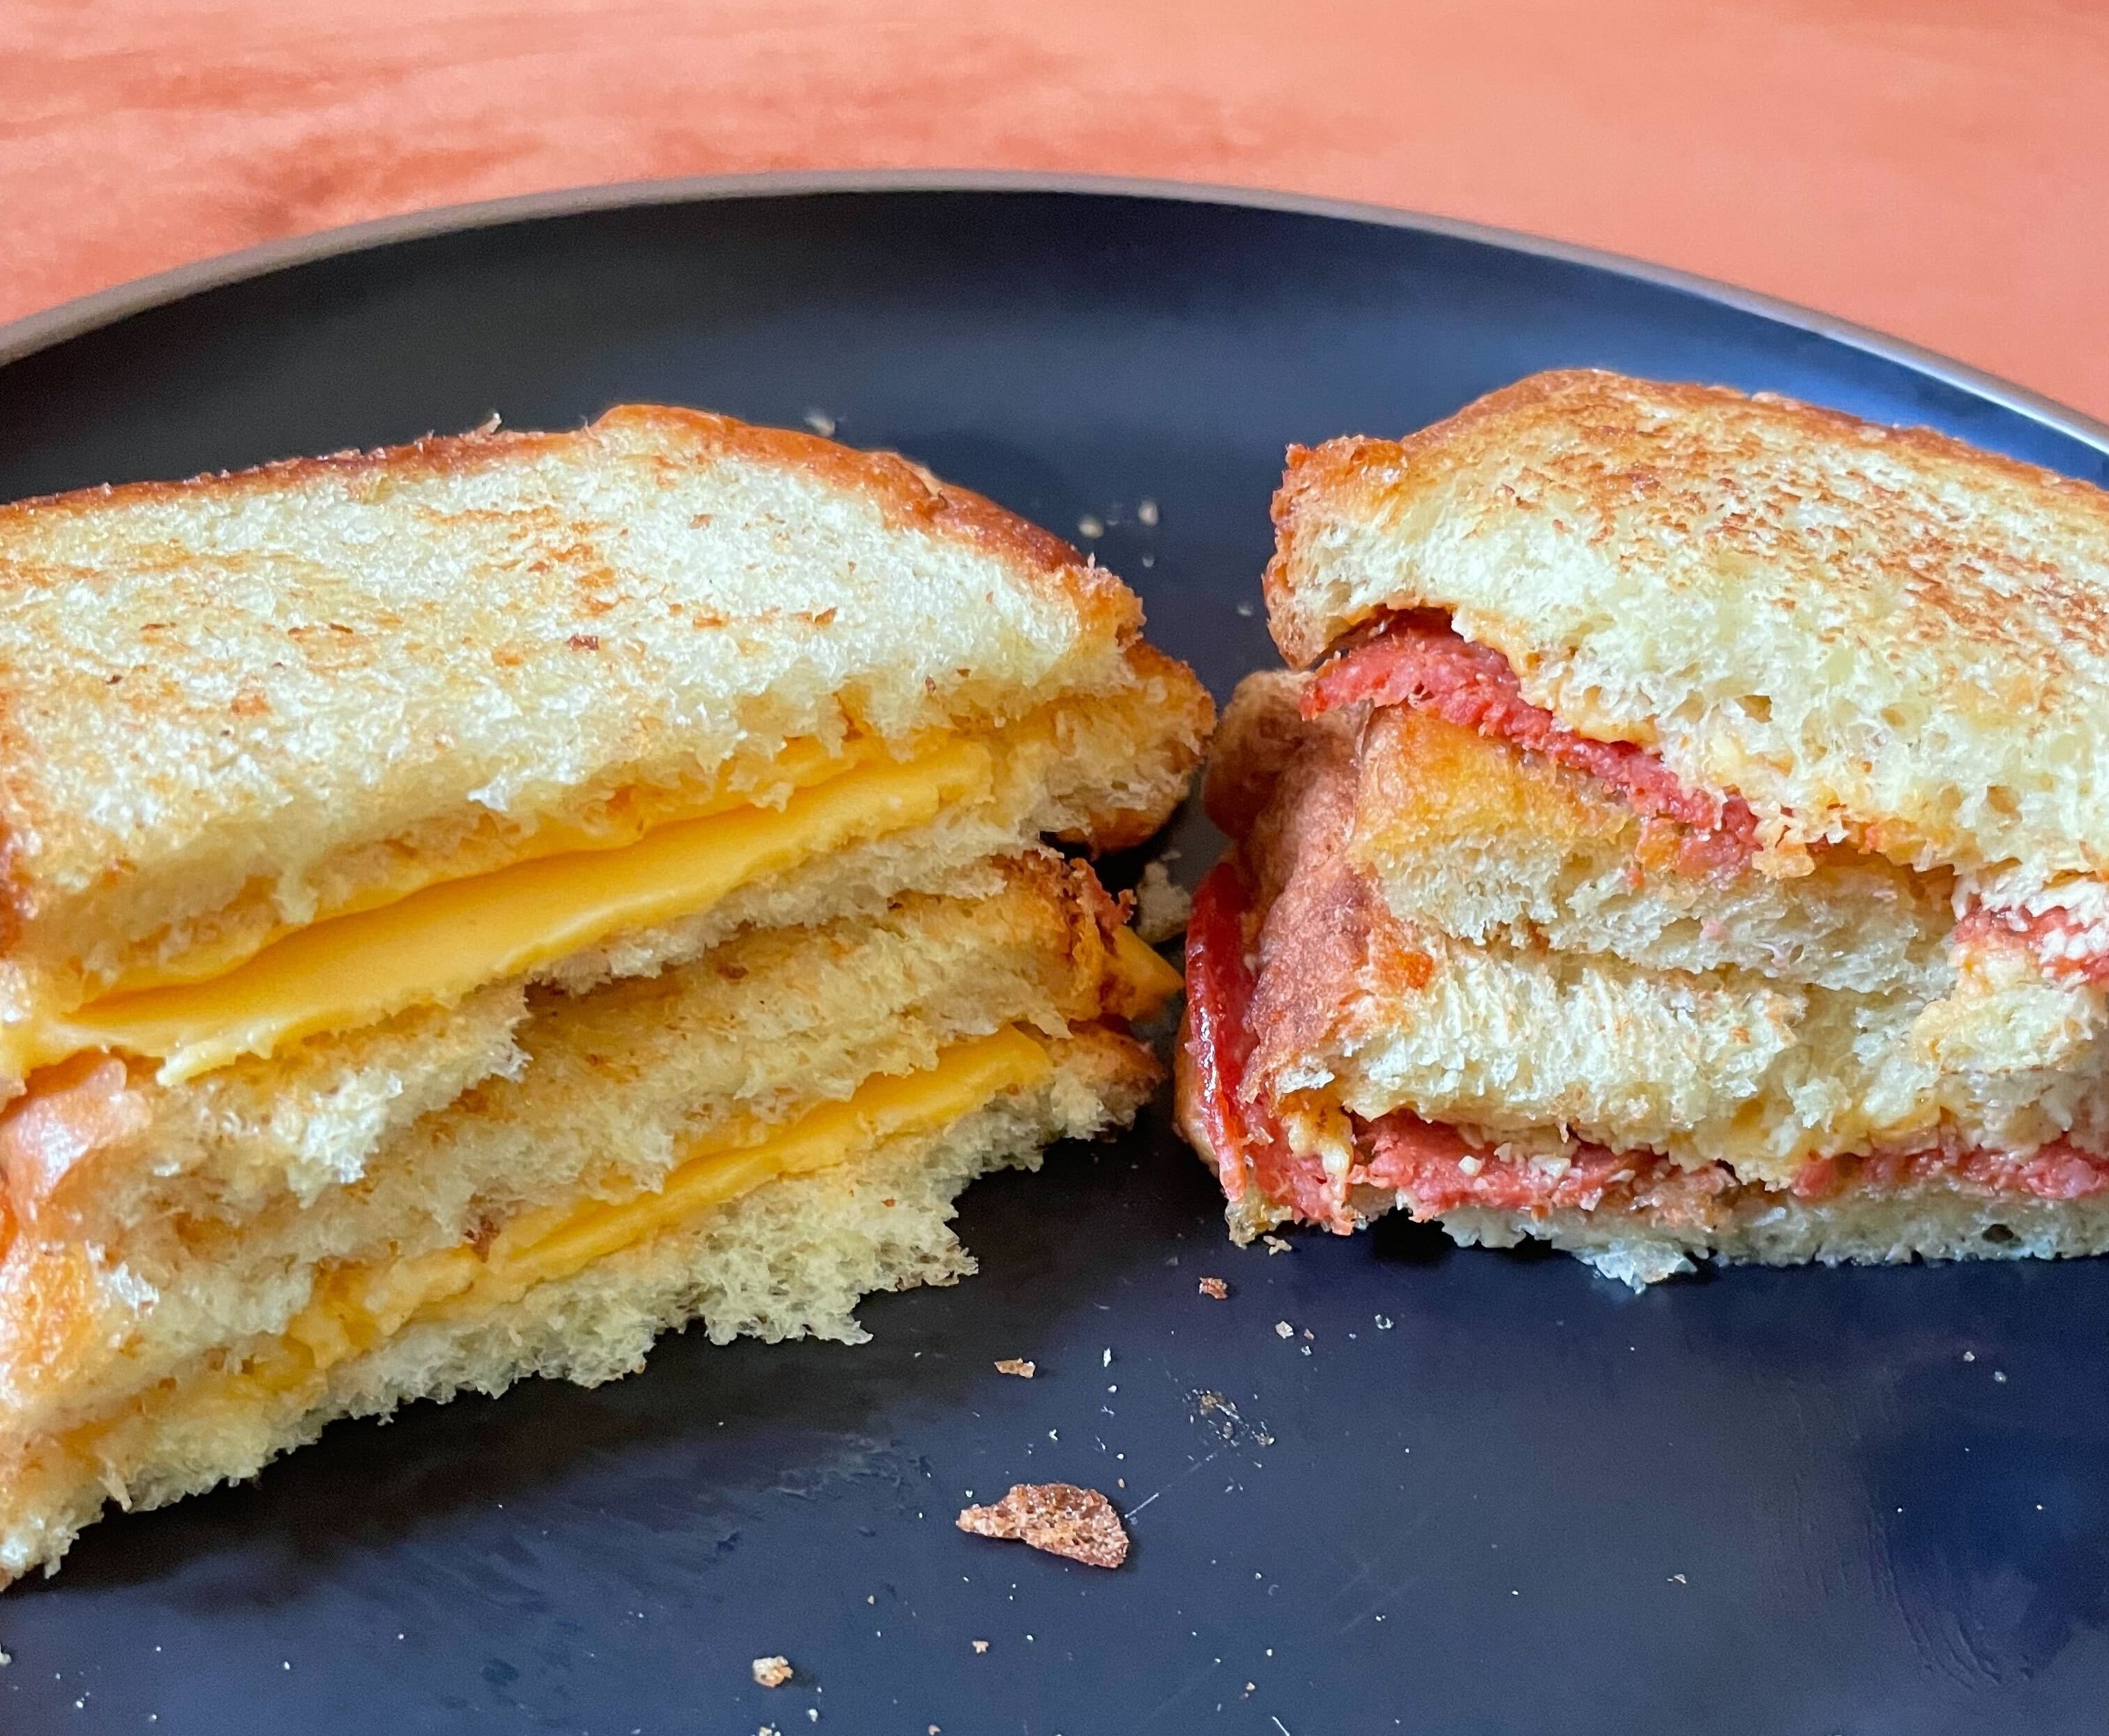 Grilled cheese sandwiches cut in half on a plate, one with pepperoni